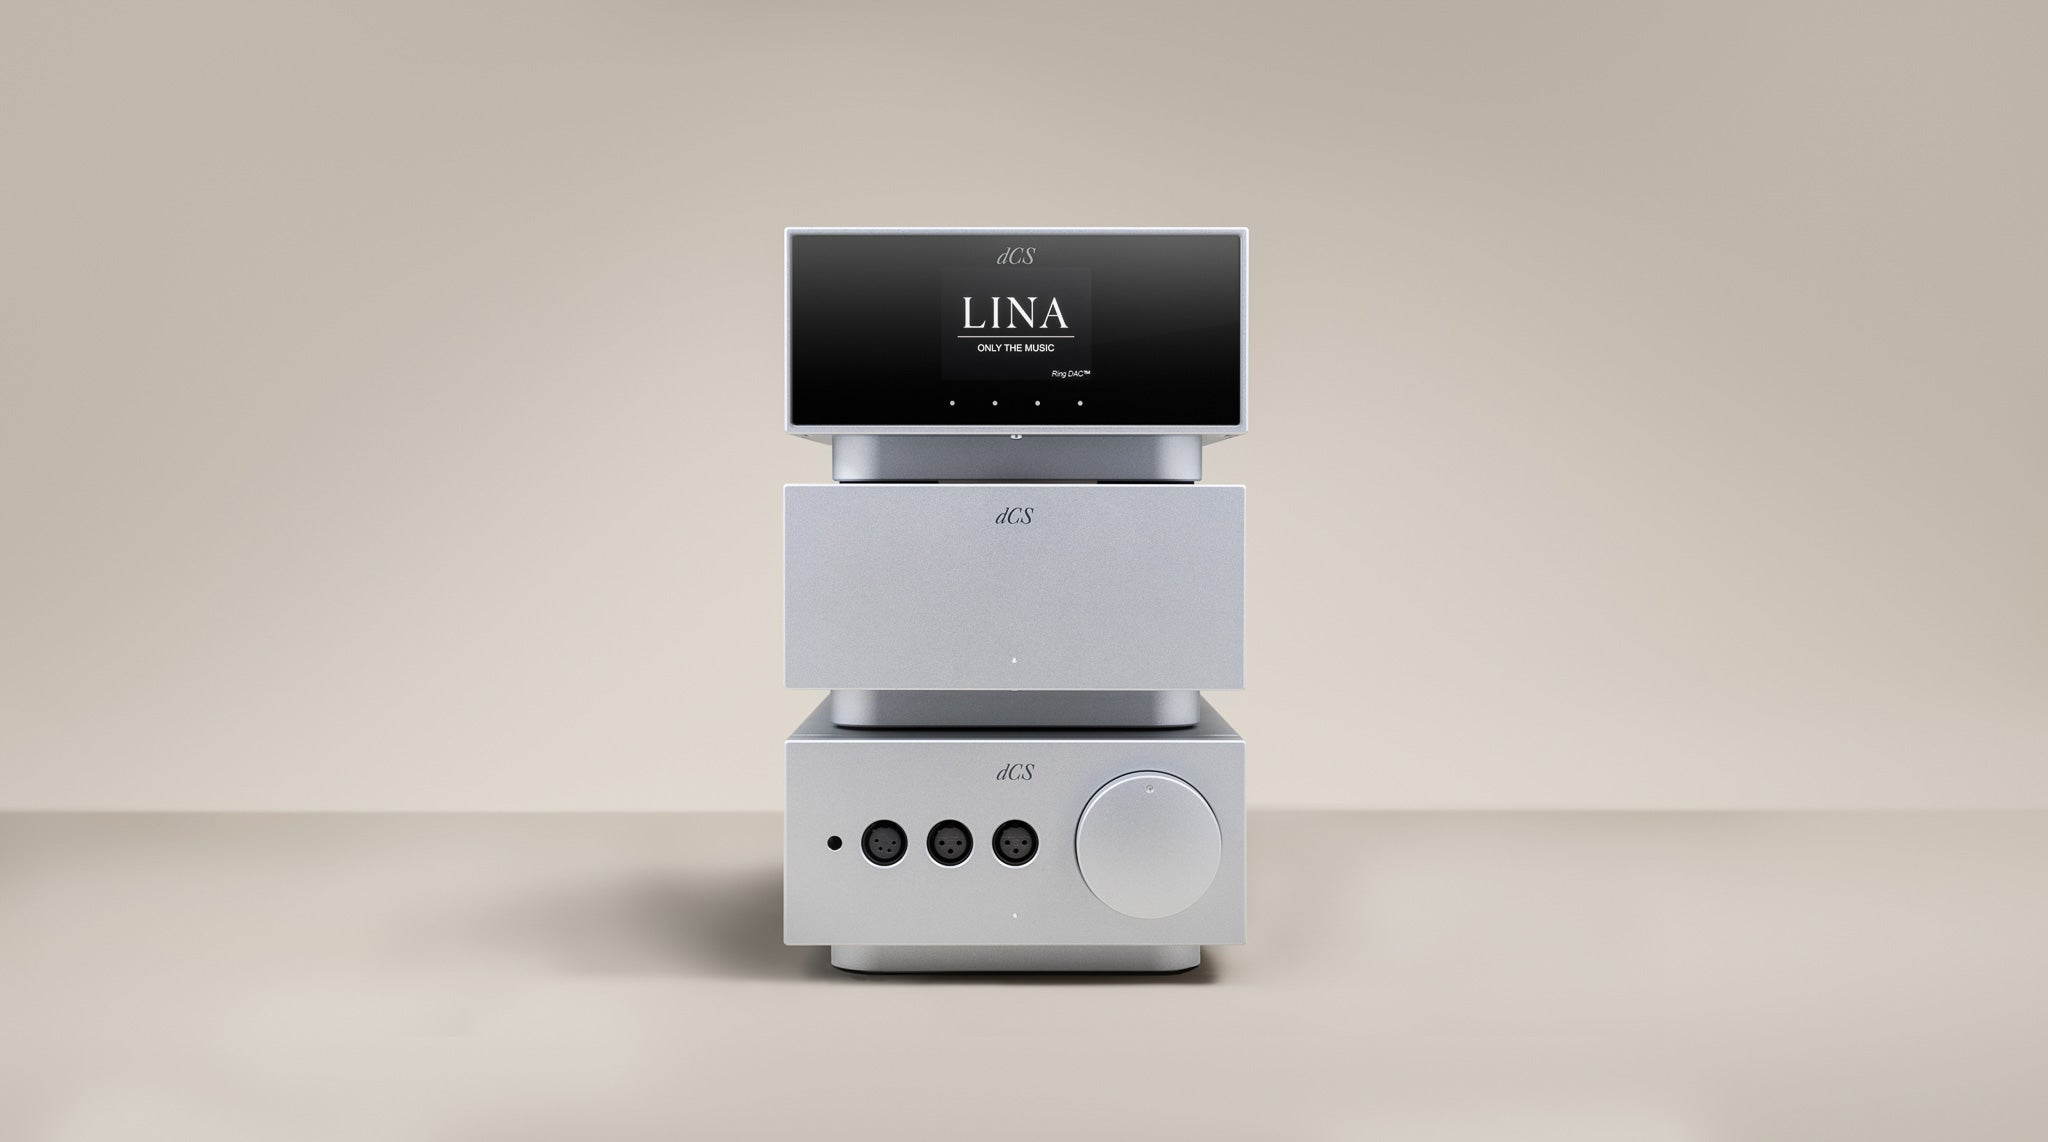 dCS Releases New Silver Finish for the Lina System